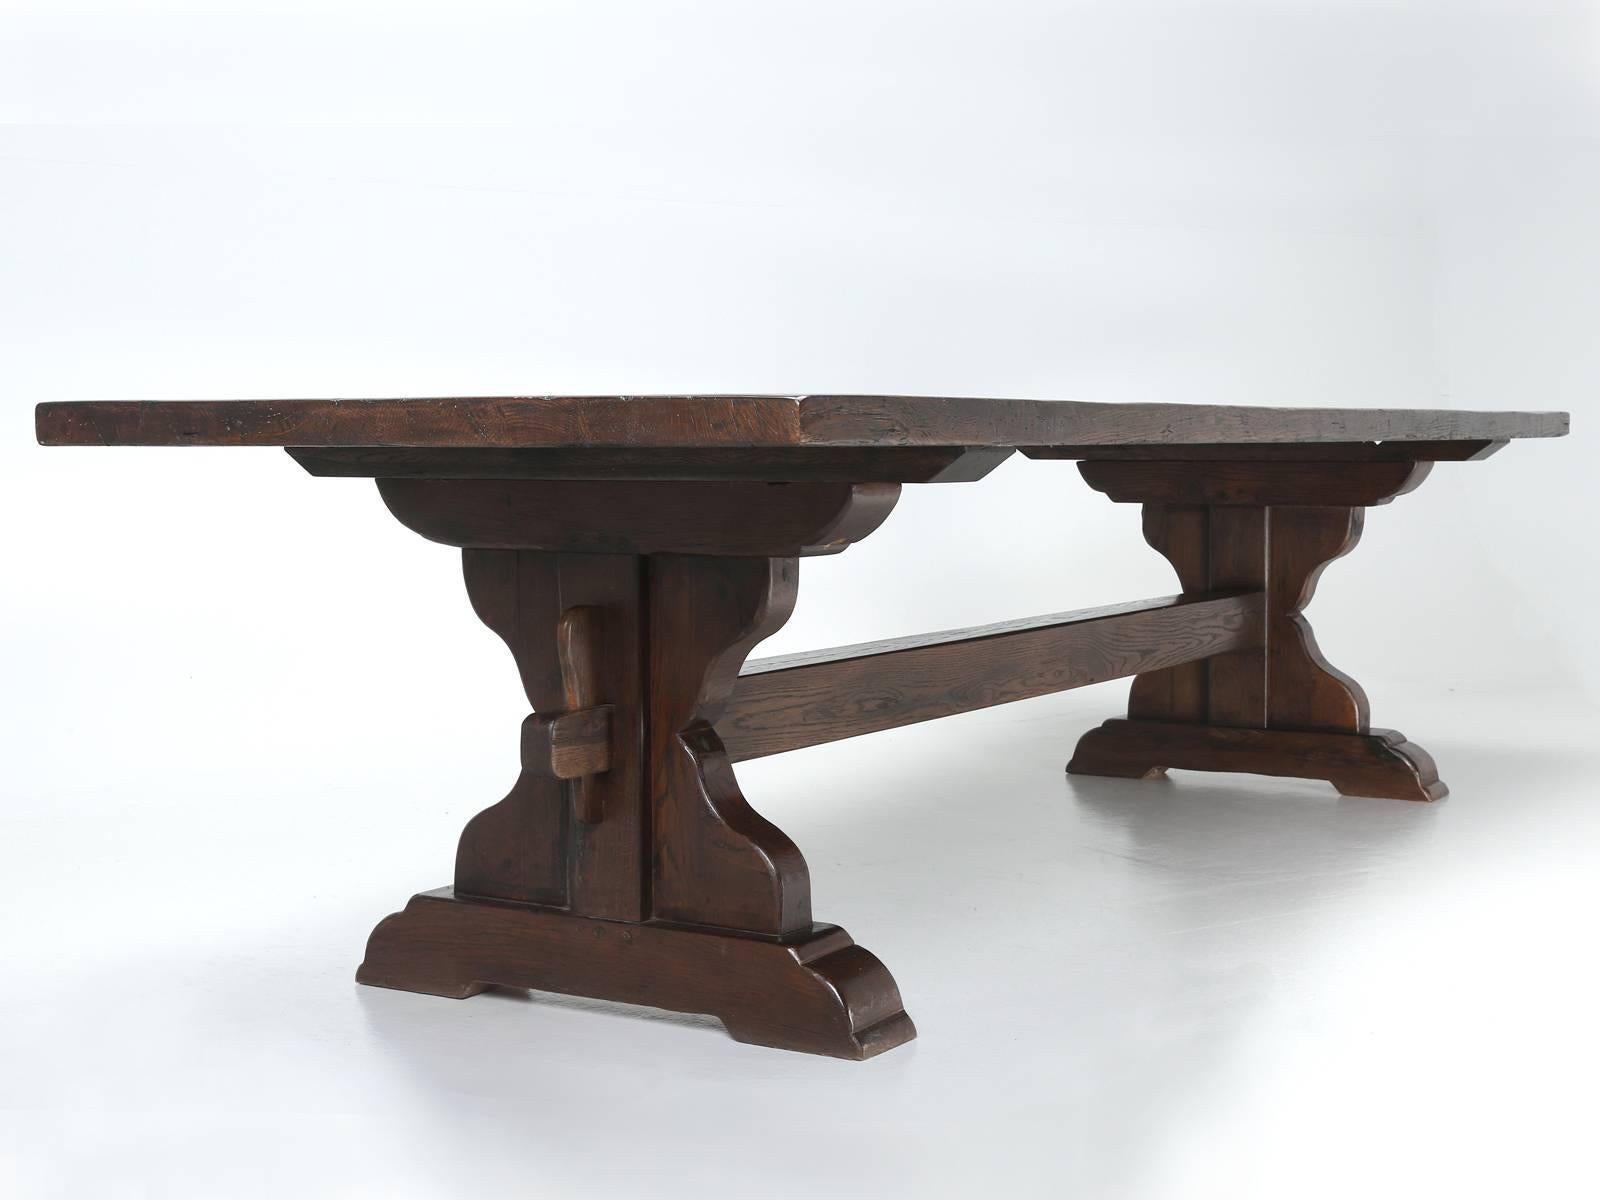 Hand-Crafted Antique French Oak Trestle Dining Table, Seats 12